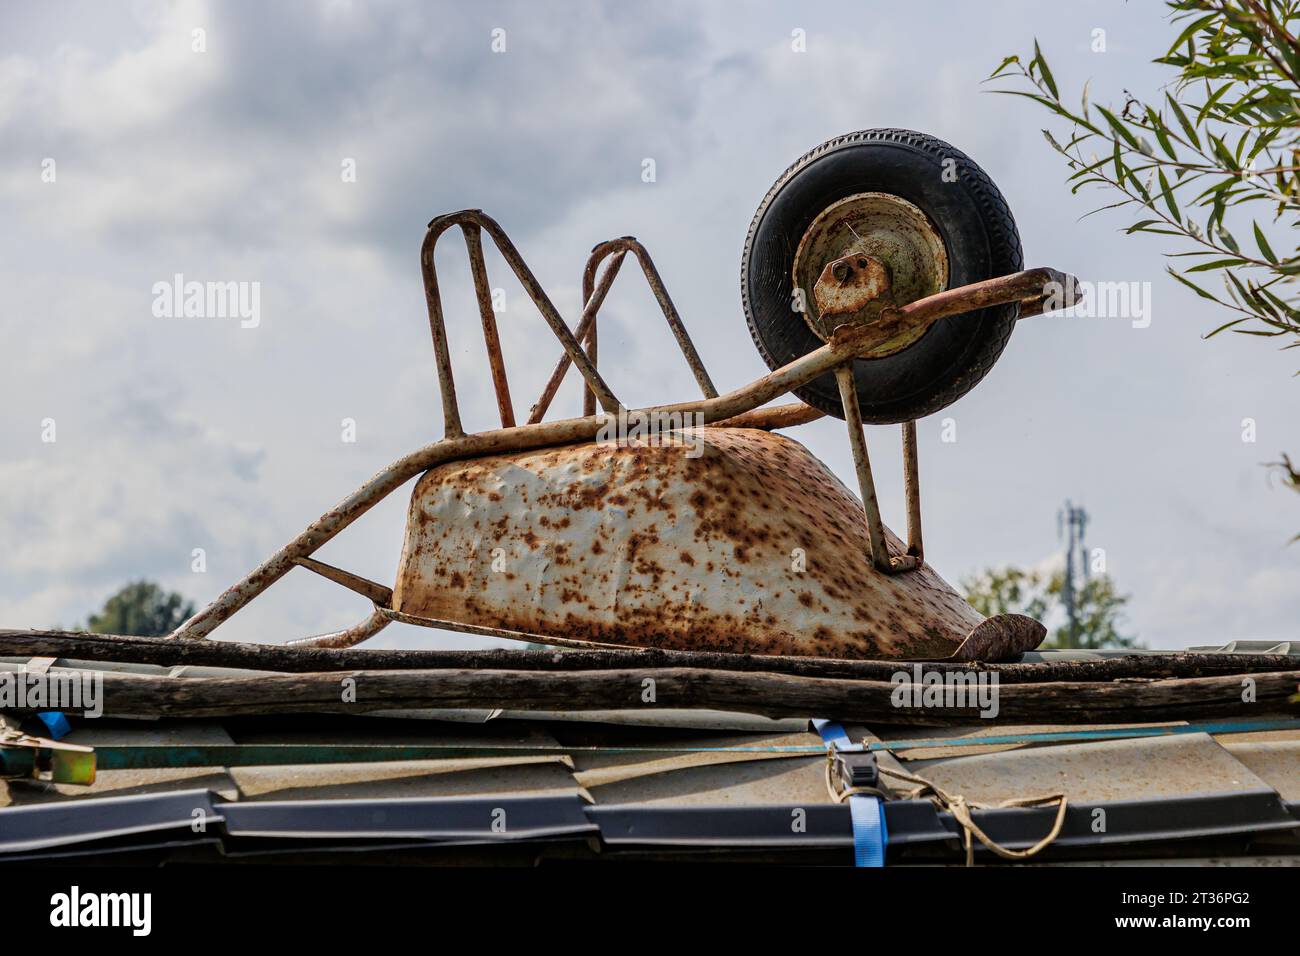 Old rusty white metal wheelbarrow upside down abandoned on wooden planks on deck of a ship against gray cloud covered sky in background, cloudy summer Stock Photo